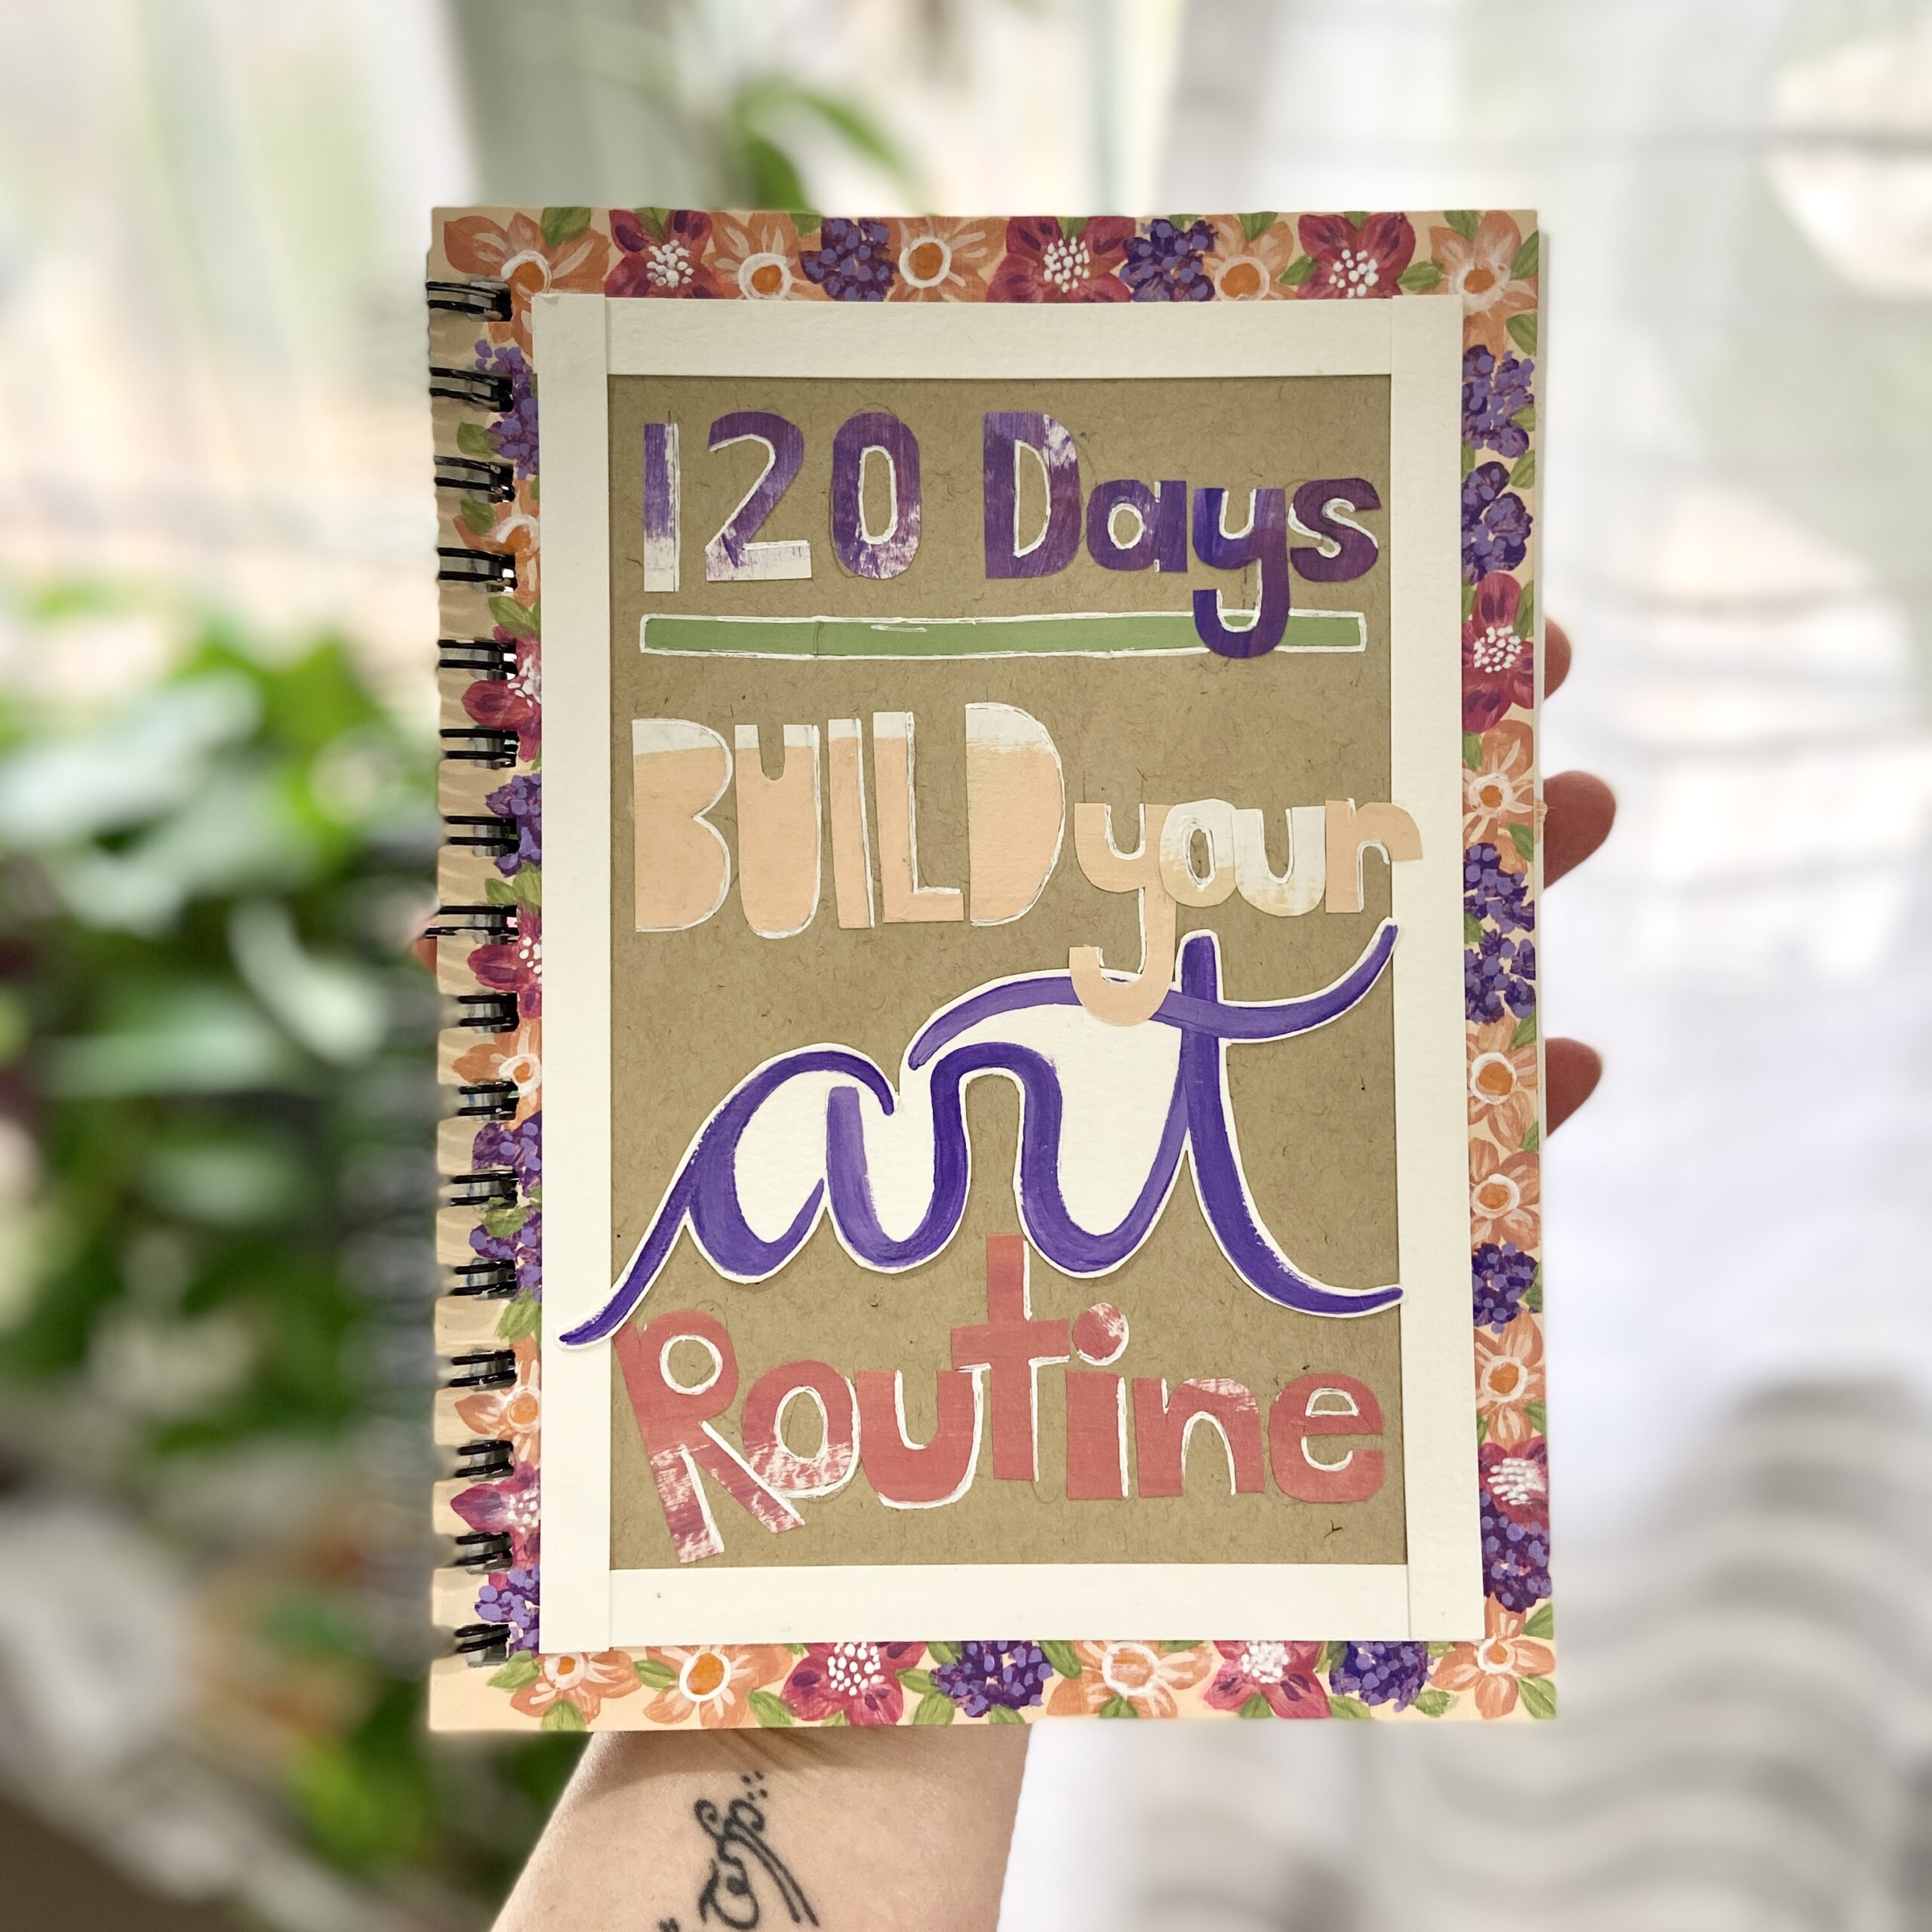 How to Build a Strong Art Routine in 120 Days with Art Journaling